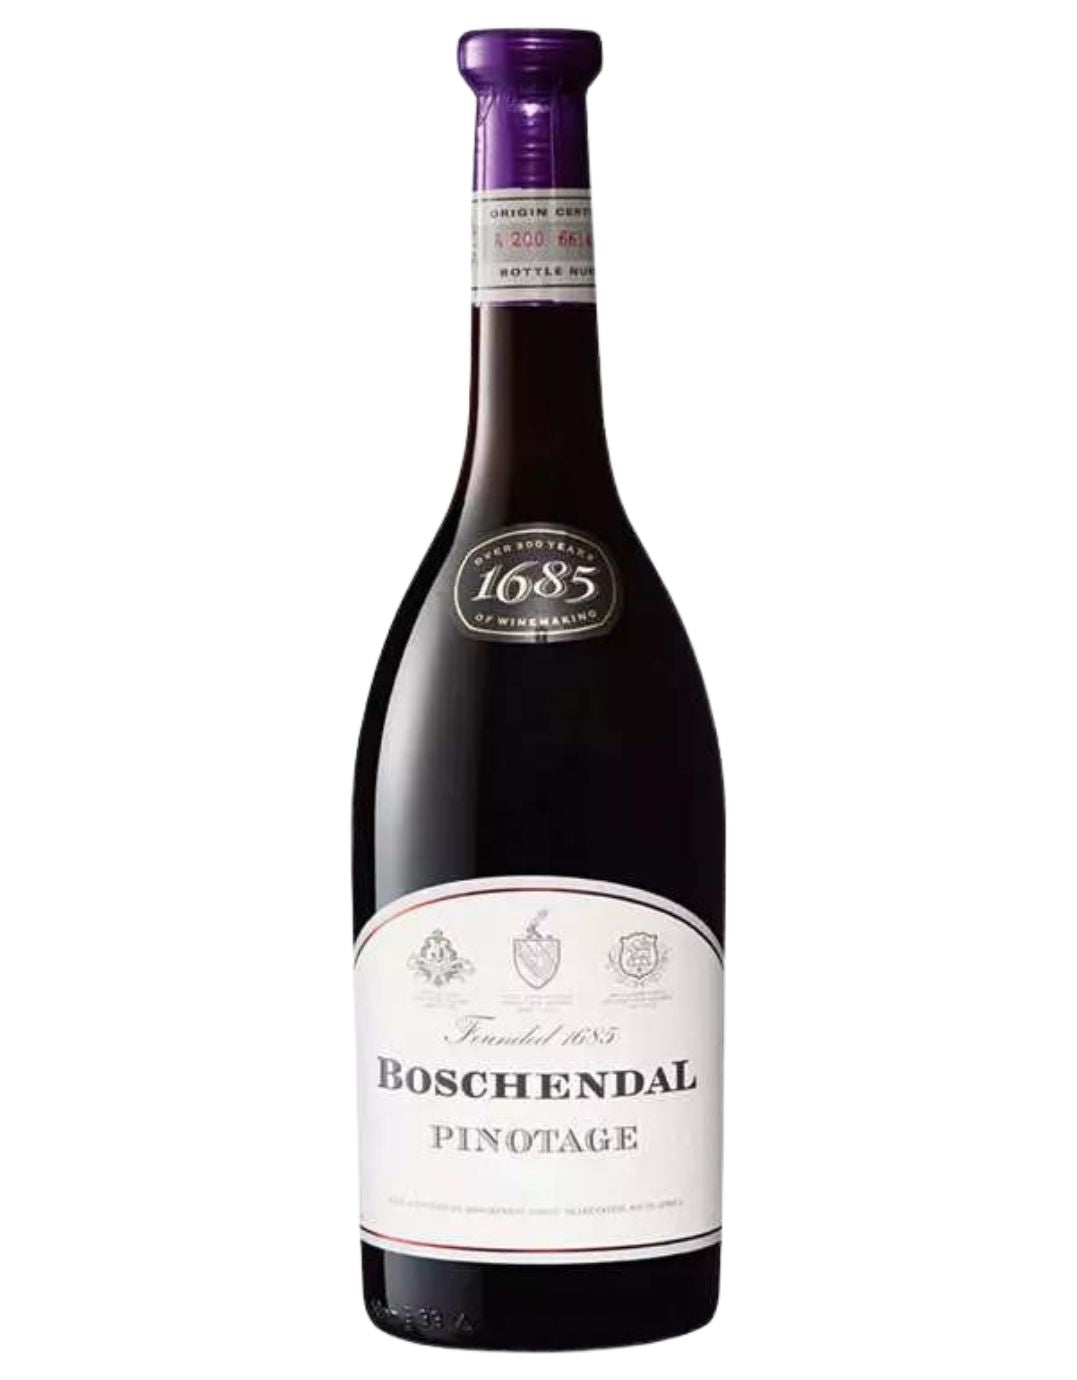 Buy Boschendal 1685 Pinotage 2019 online now WineStore The 